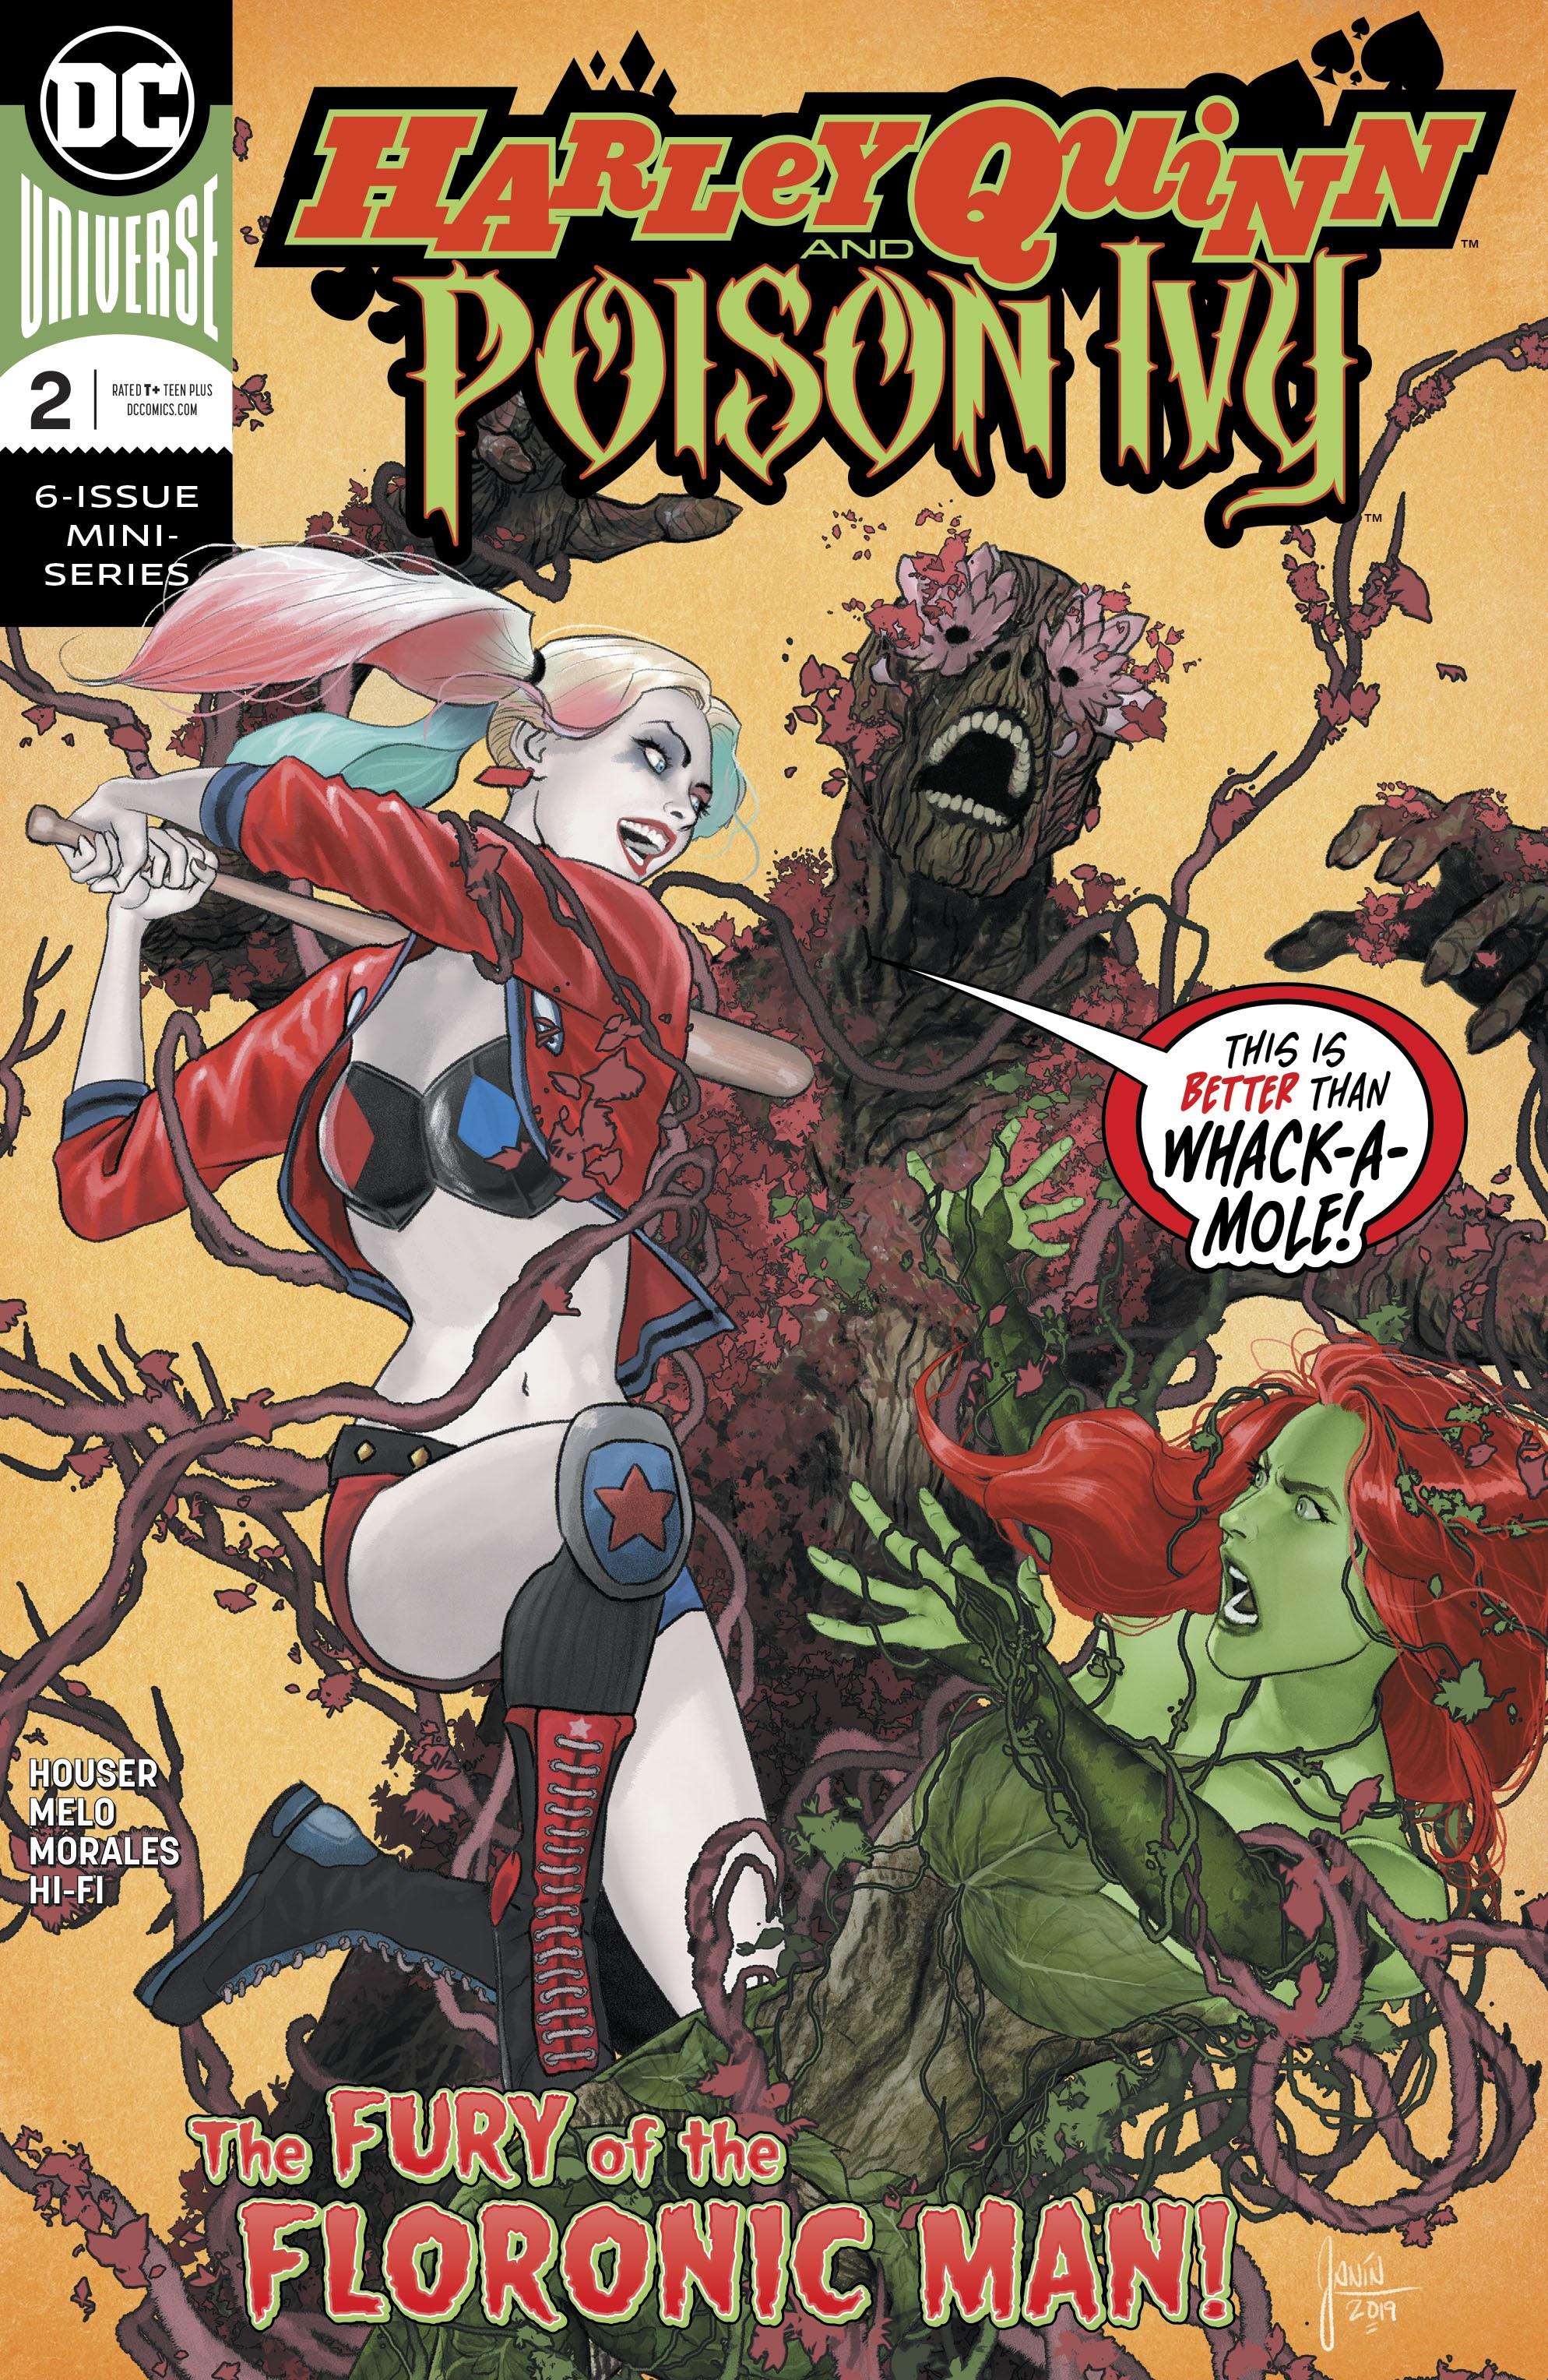 Harley Quinn and Poison Ivy Vol. 1 #2